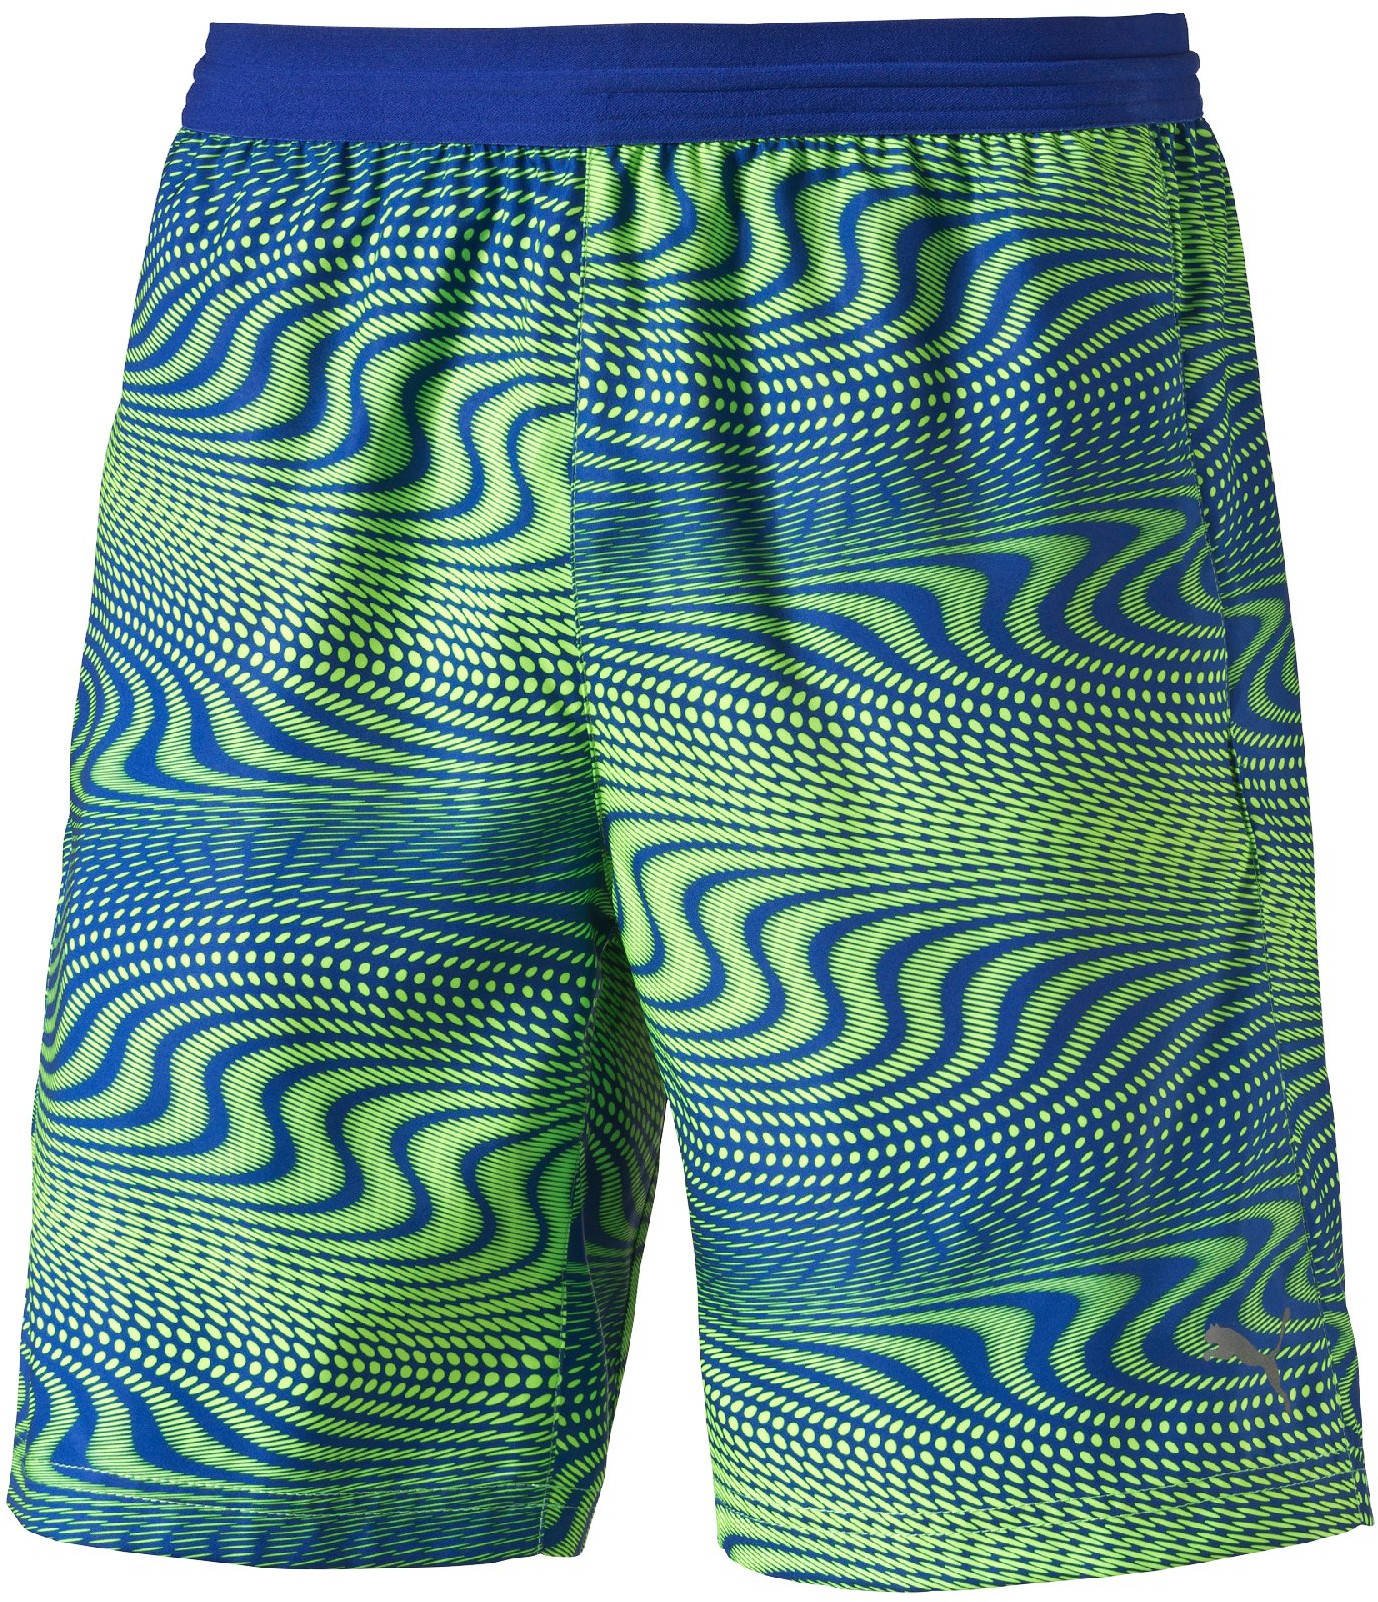 Woven Graphic Shorts